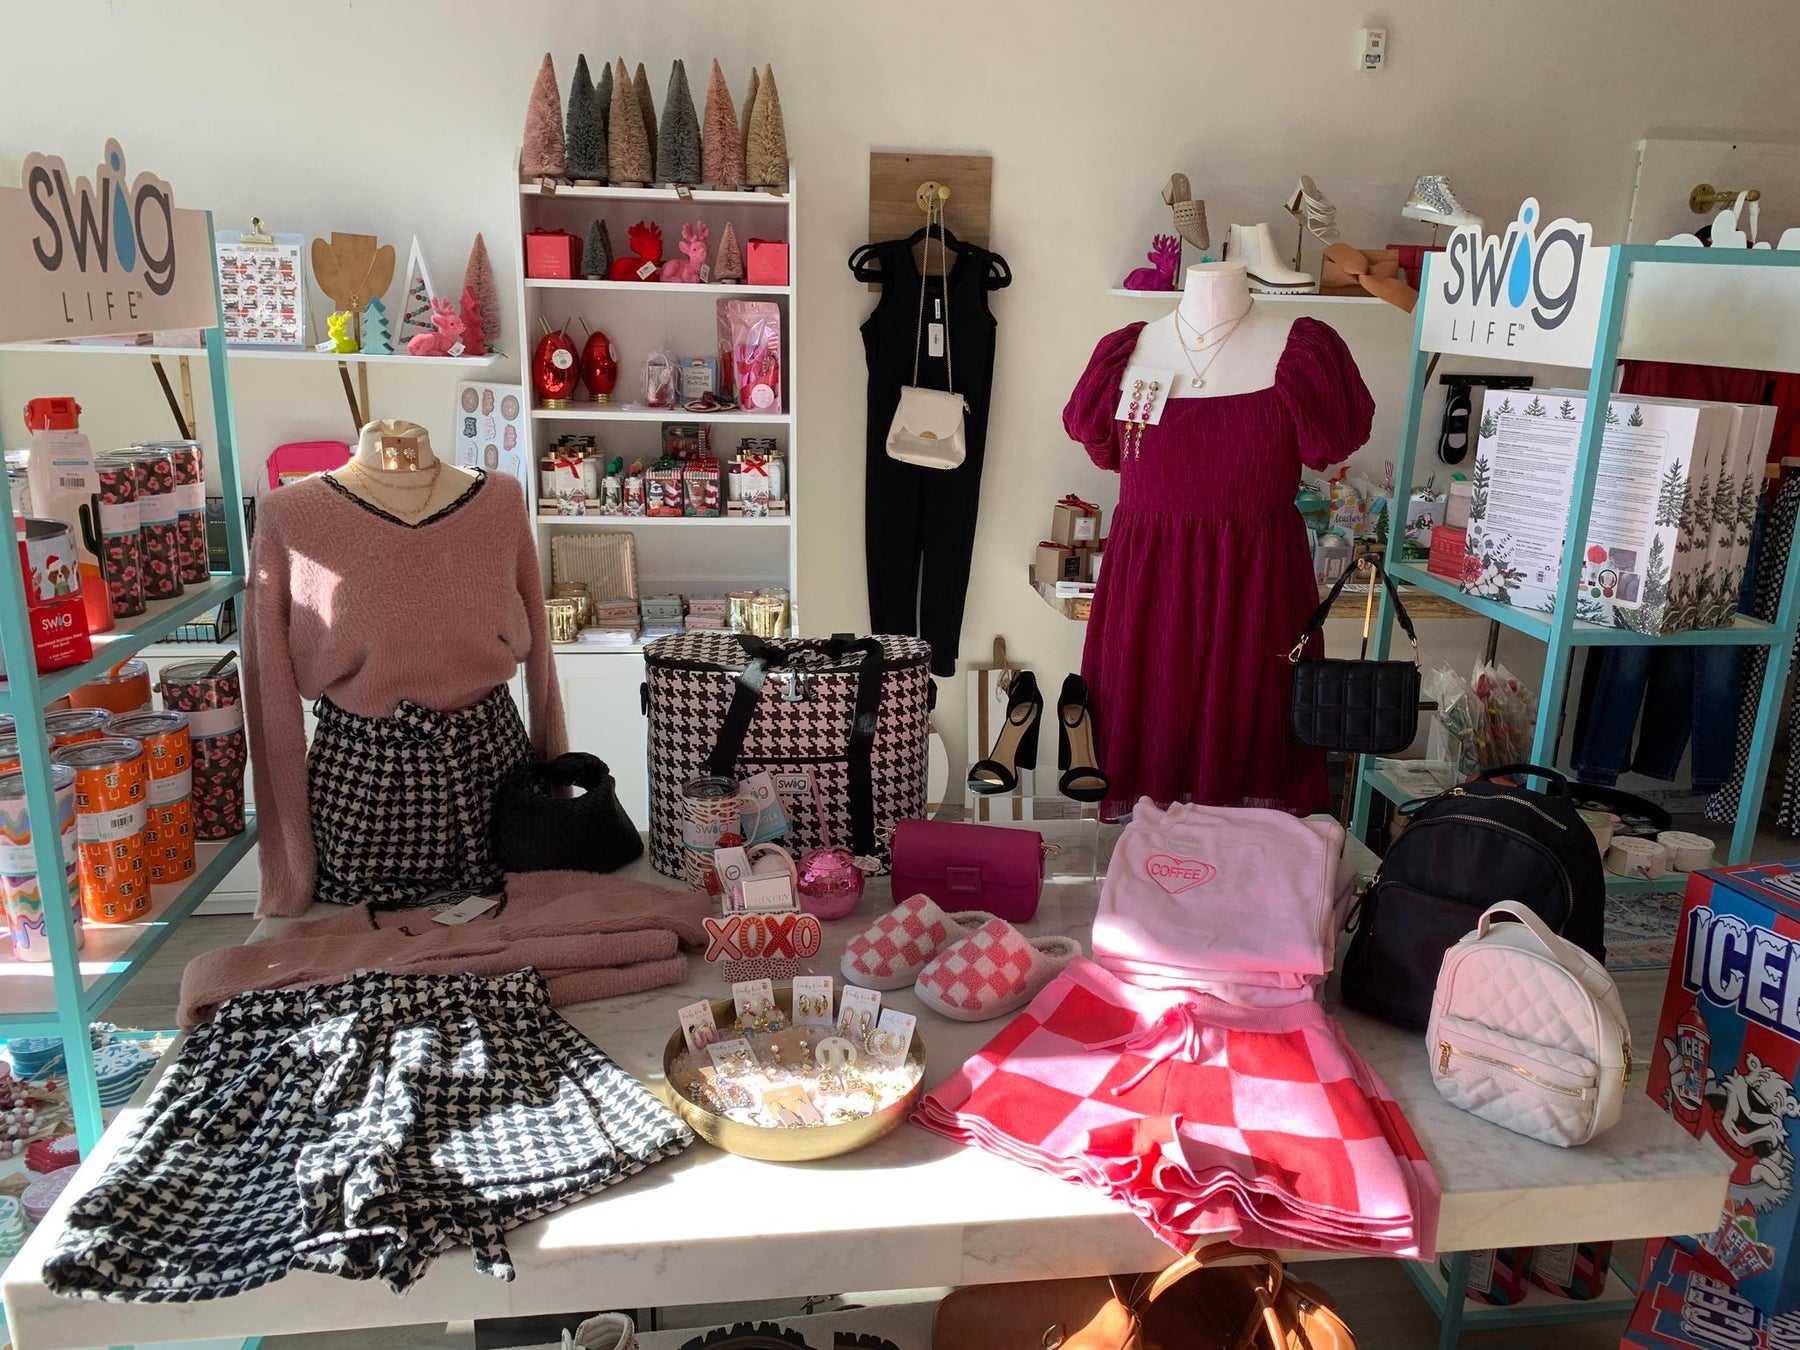 Visit one of our Locations, Cape Girardeau or Dexter, MO | Peachy Keen Boutique